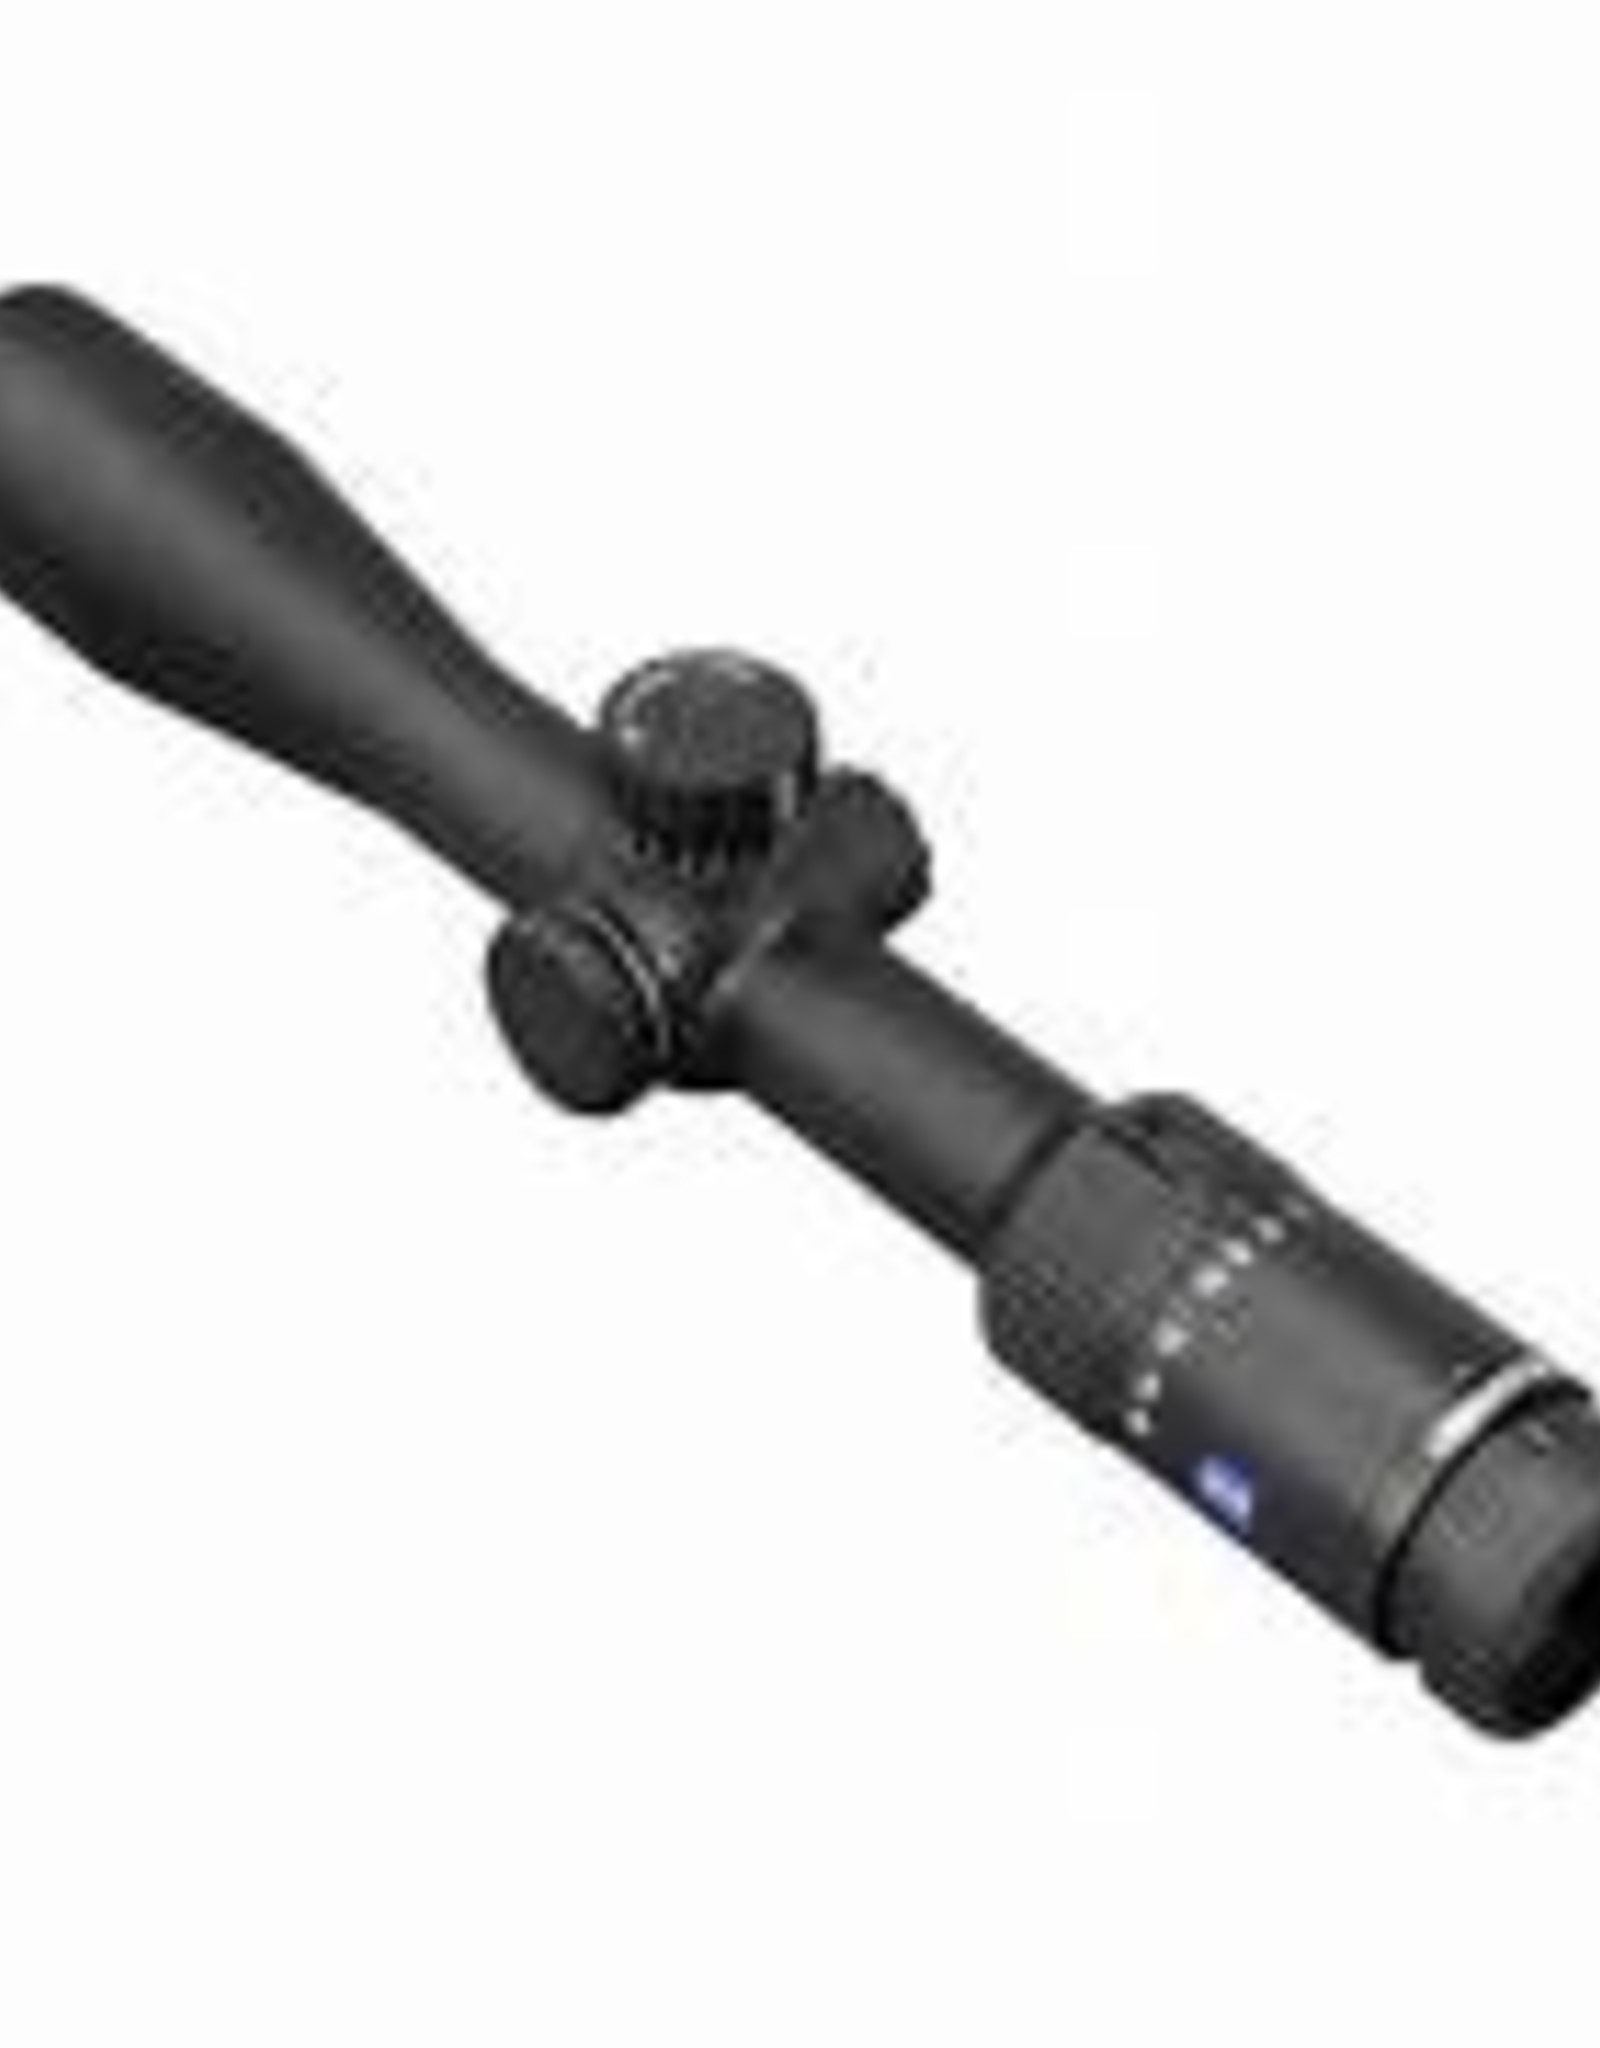 Zeiss Conquest V4 4-16x44 Reticle #60 Illuminated